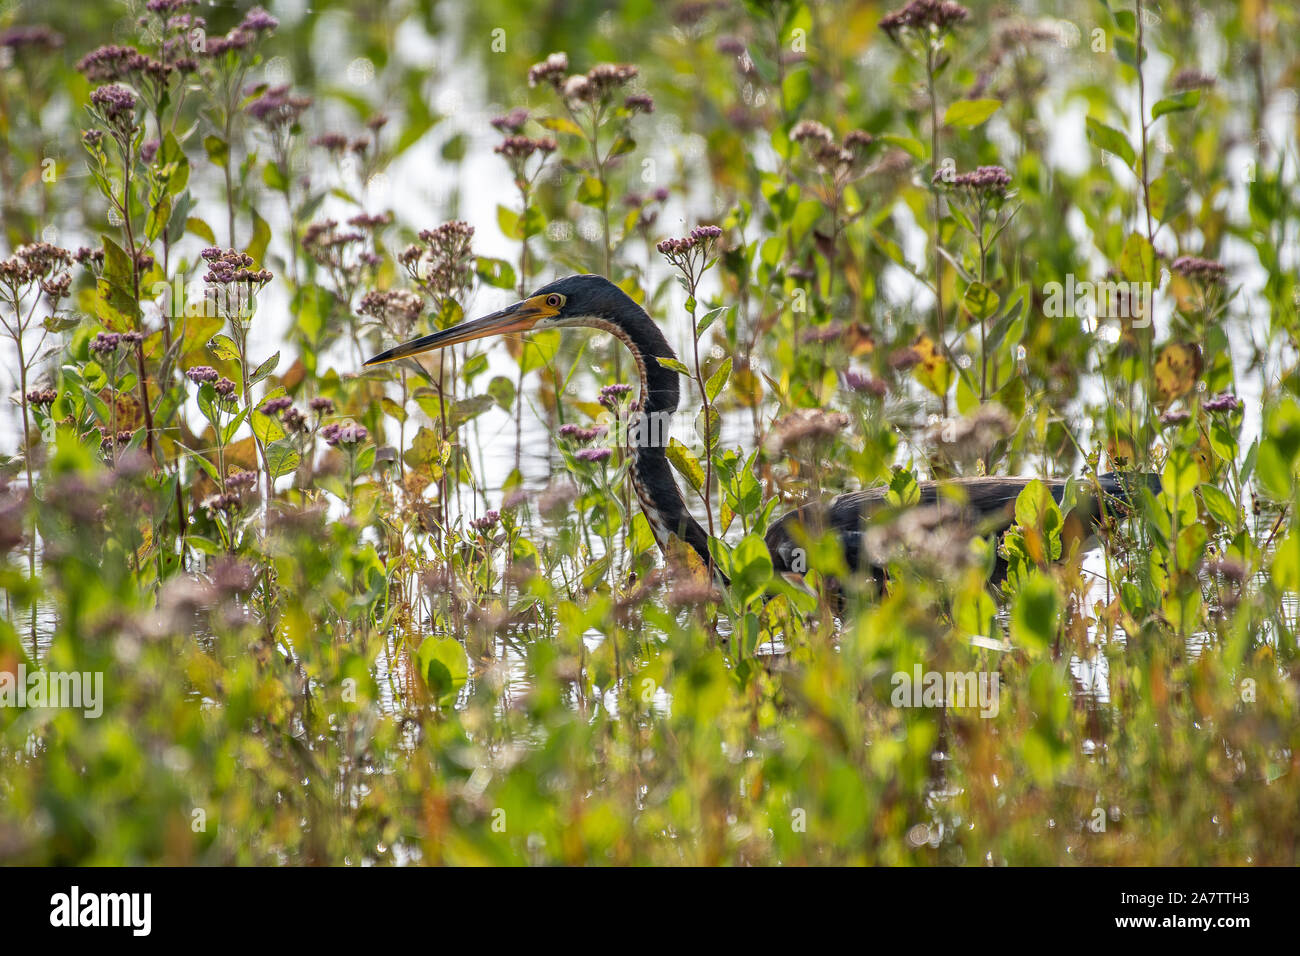 Tri-colored heron hunting in a marsh of flowers Stock Photo